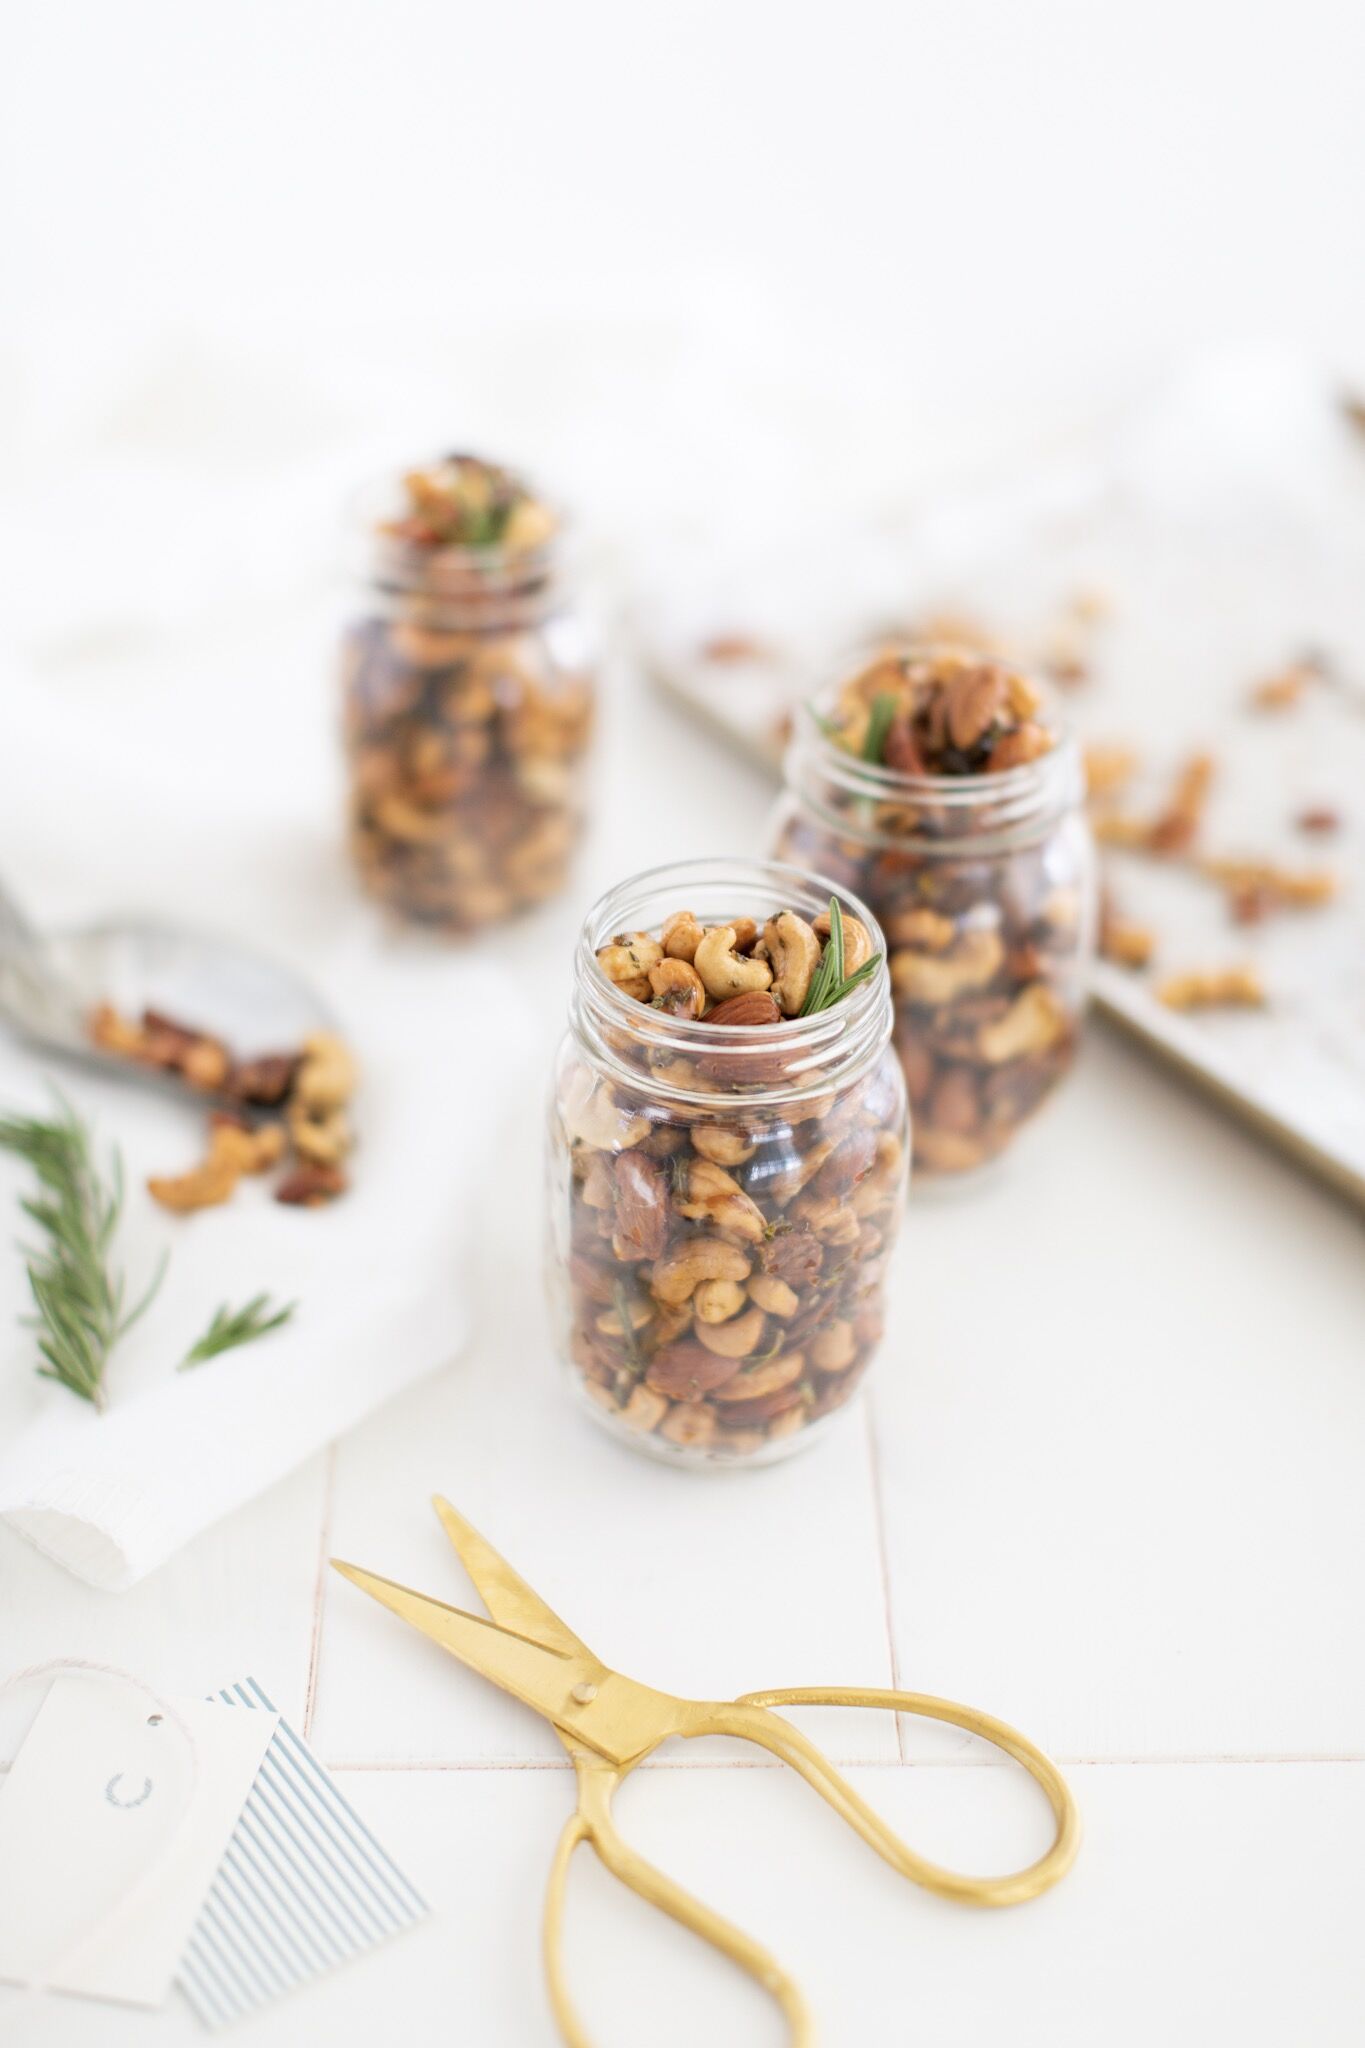 Rosemary Roasted Nuts - a perfect hostess gift or addition to your appetizer spread.